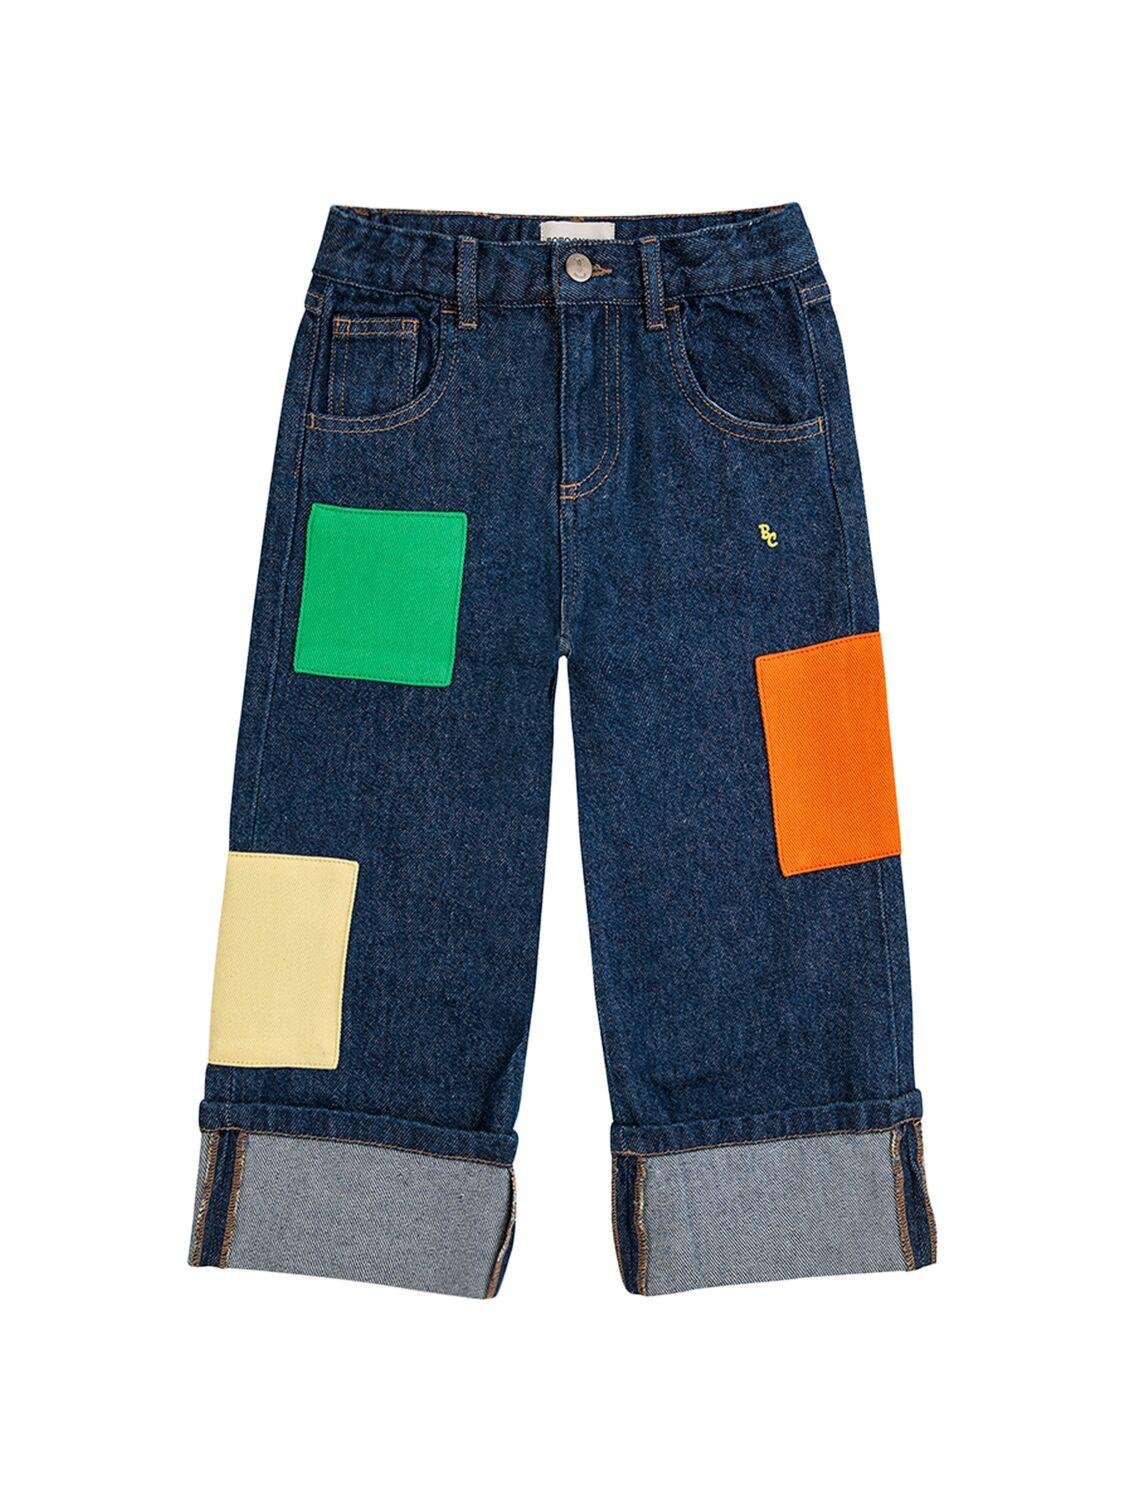 Denim Jeans W/patches by BOBO CHOSES